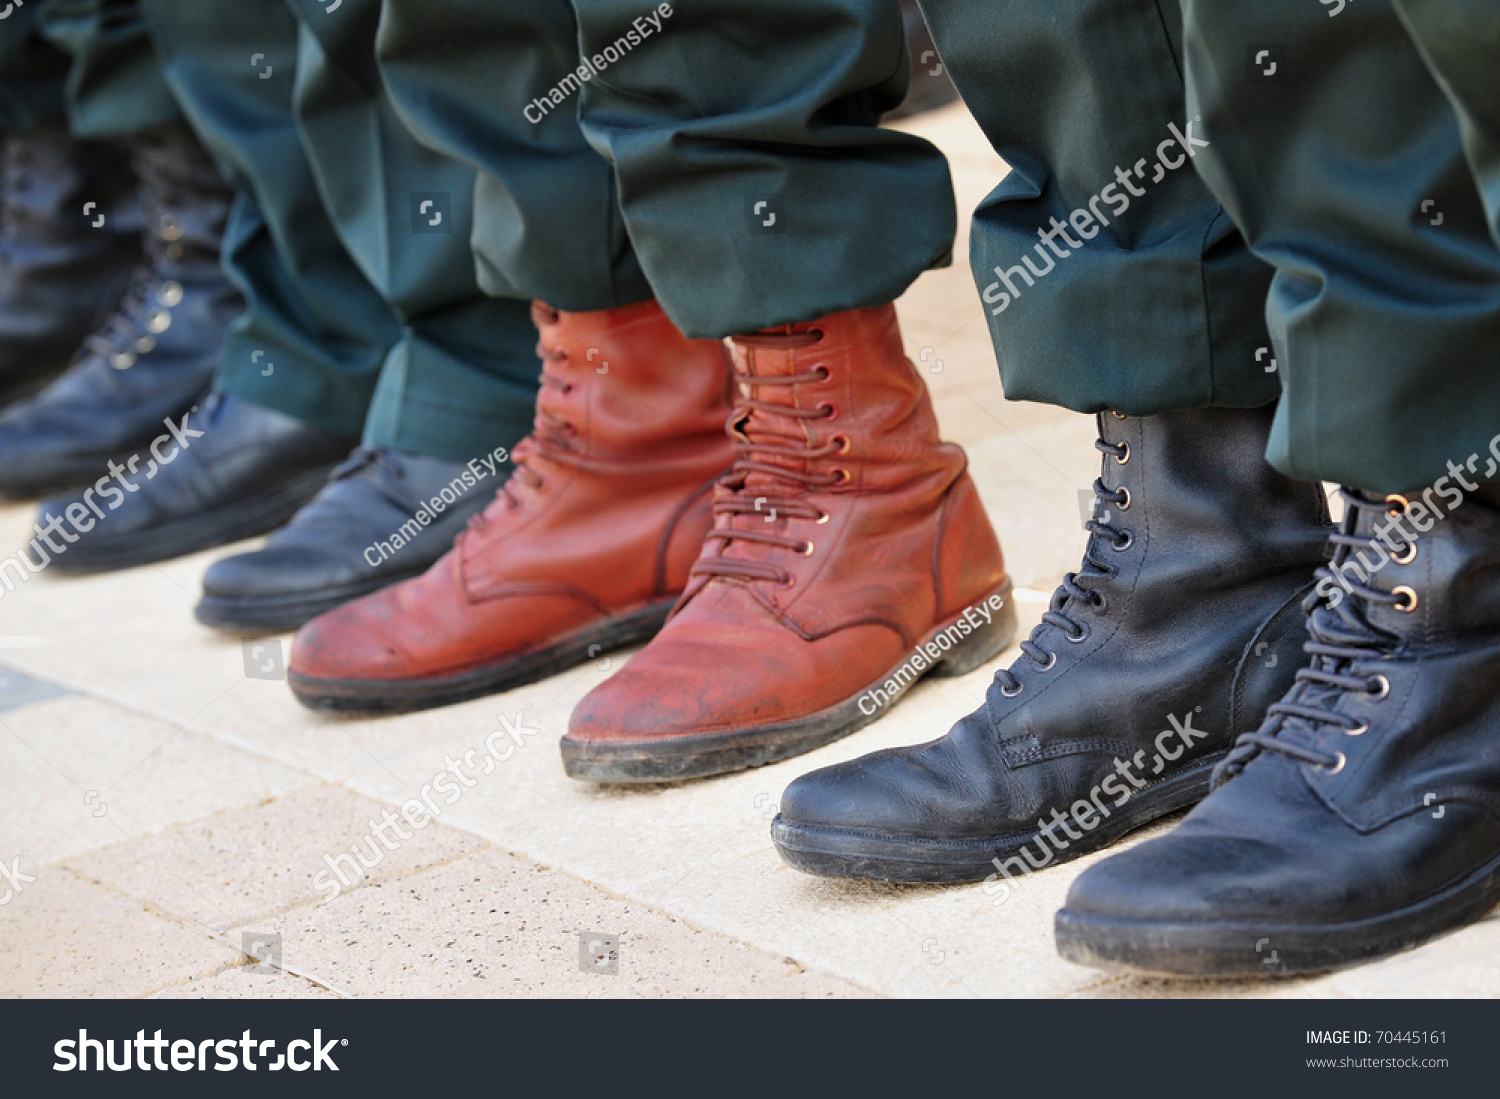 An Army Soldier Wears Brown Boots While All Other Soldiers Wear ...